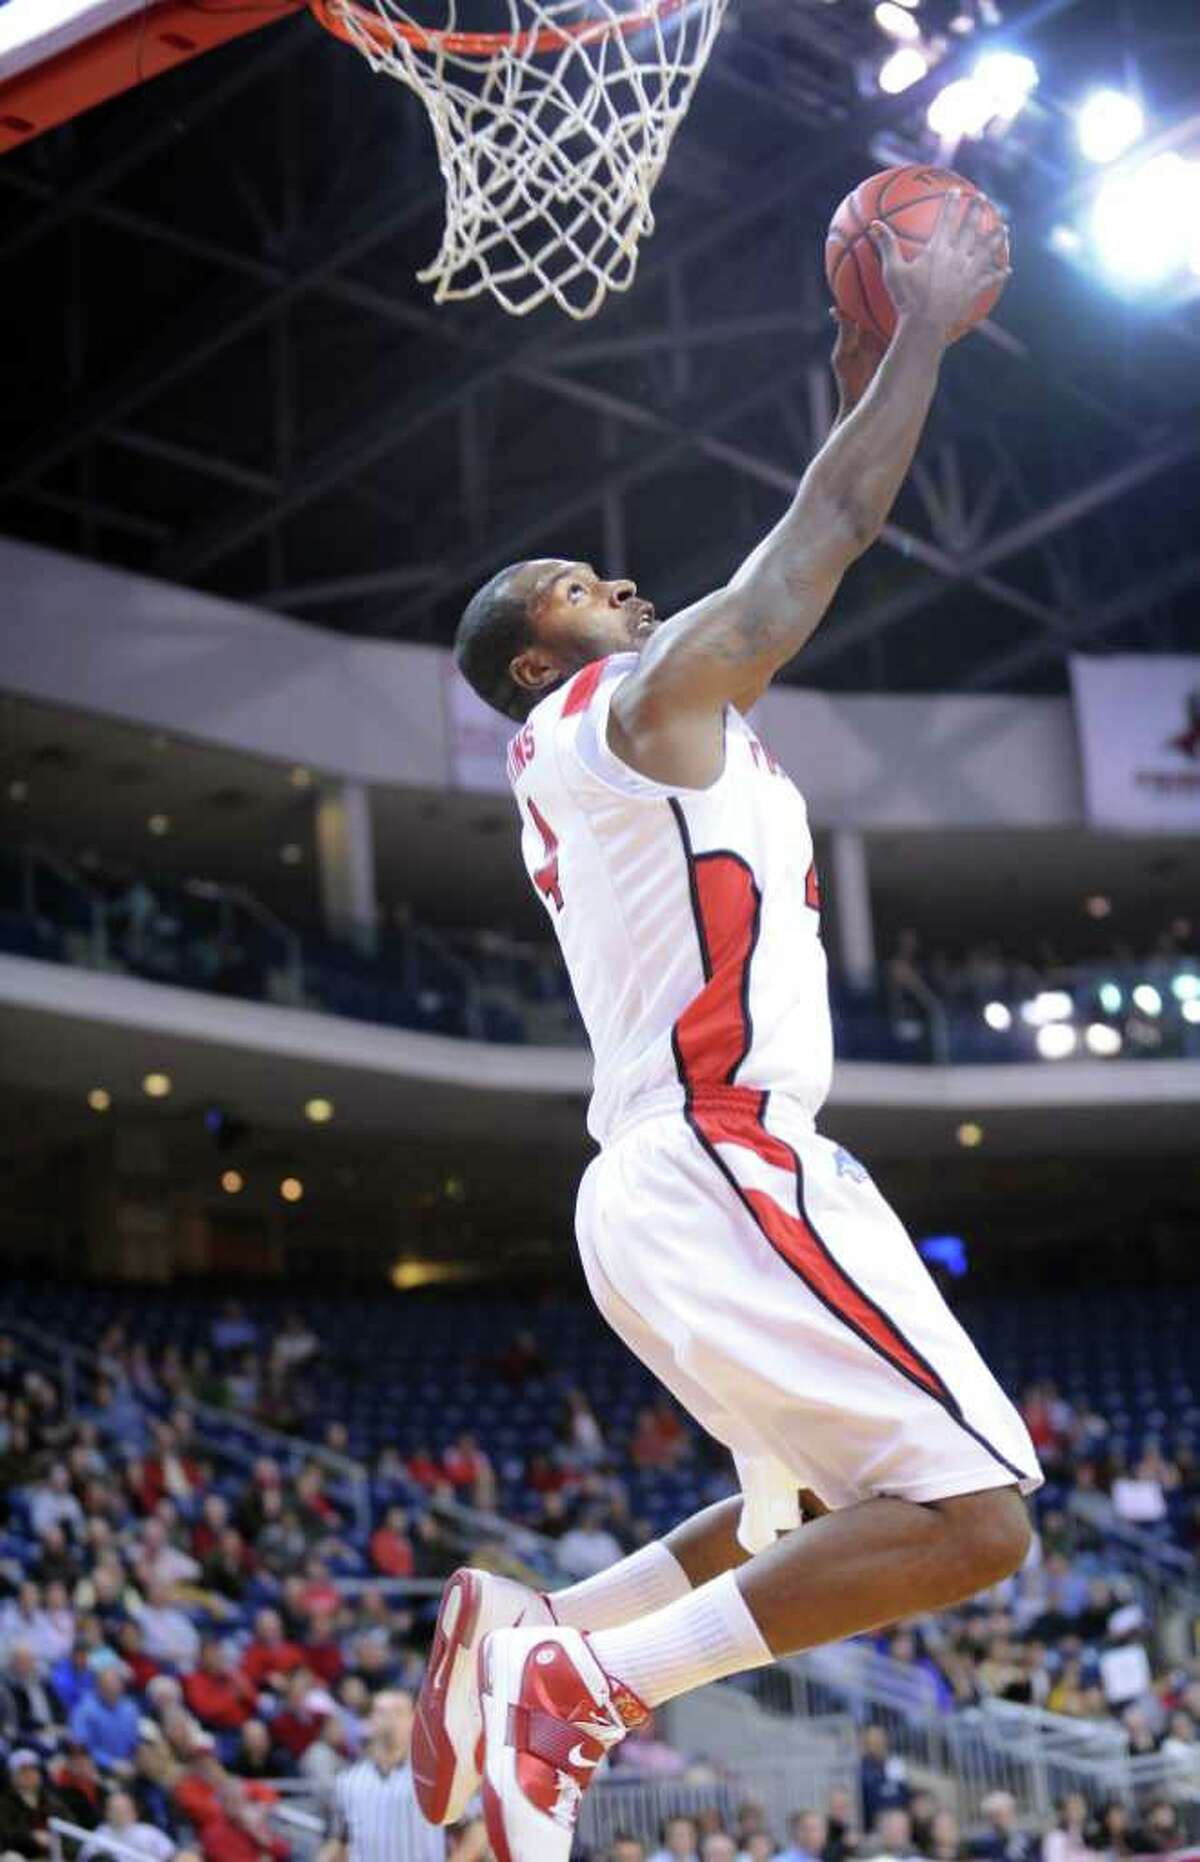 Fairfield's Yorel Hawkins dunks the ball during game action against Austin Peay at the Webster Bank Arena at Harbor Yard in Bridgeport, Conn. Saturday, Feb. 19, 2011.